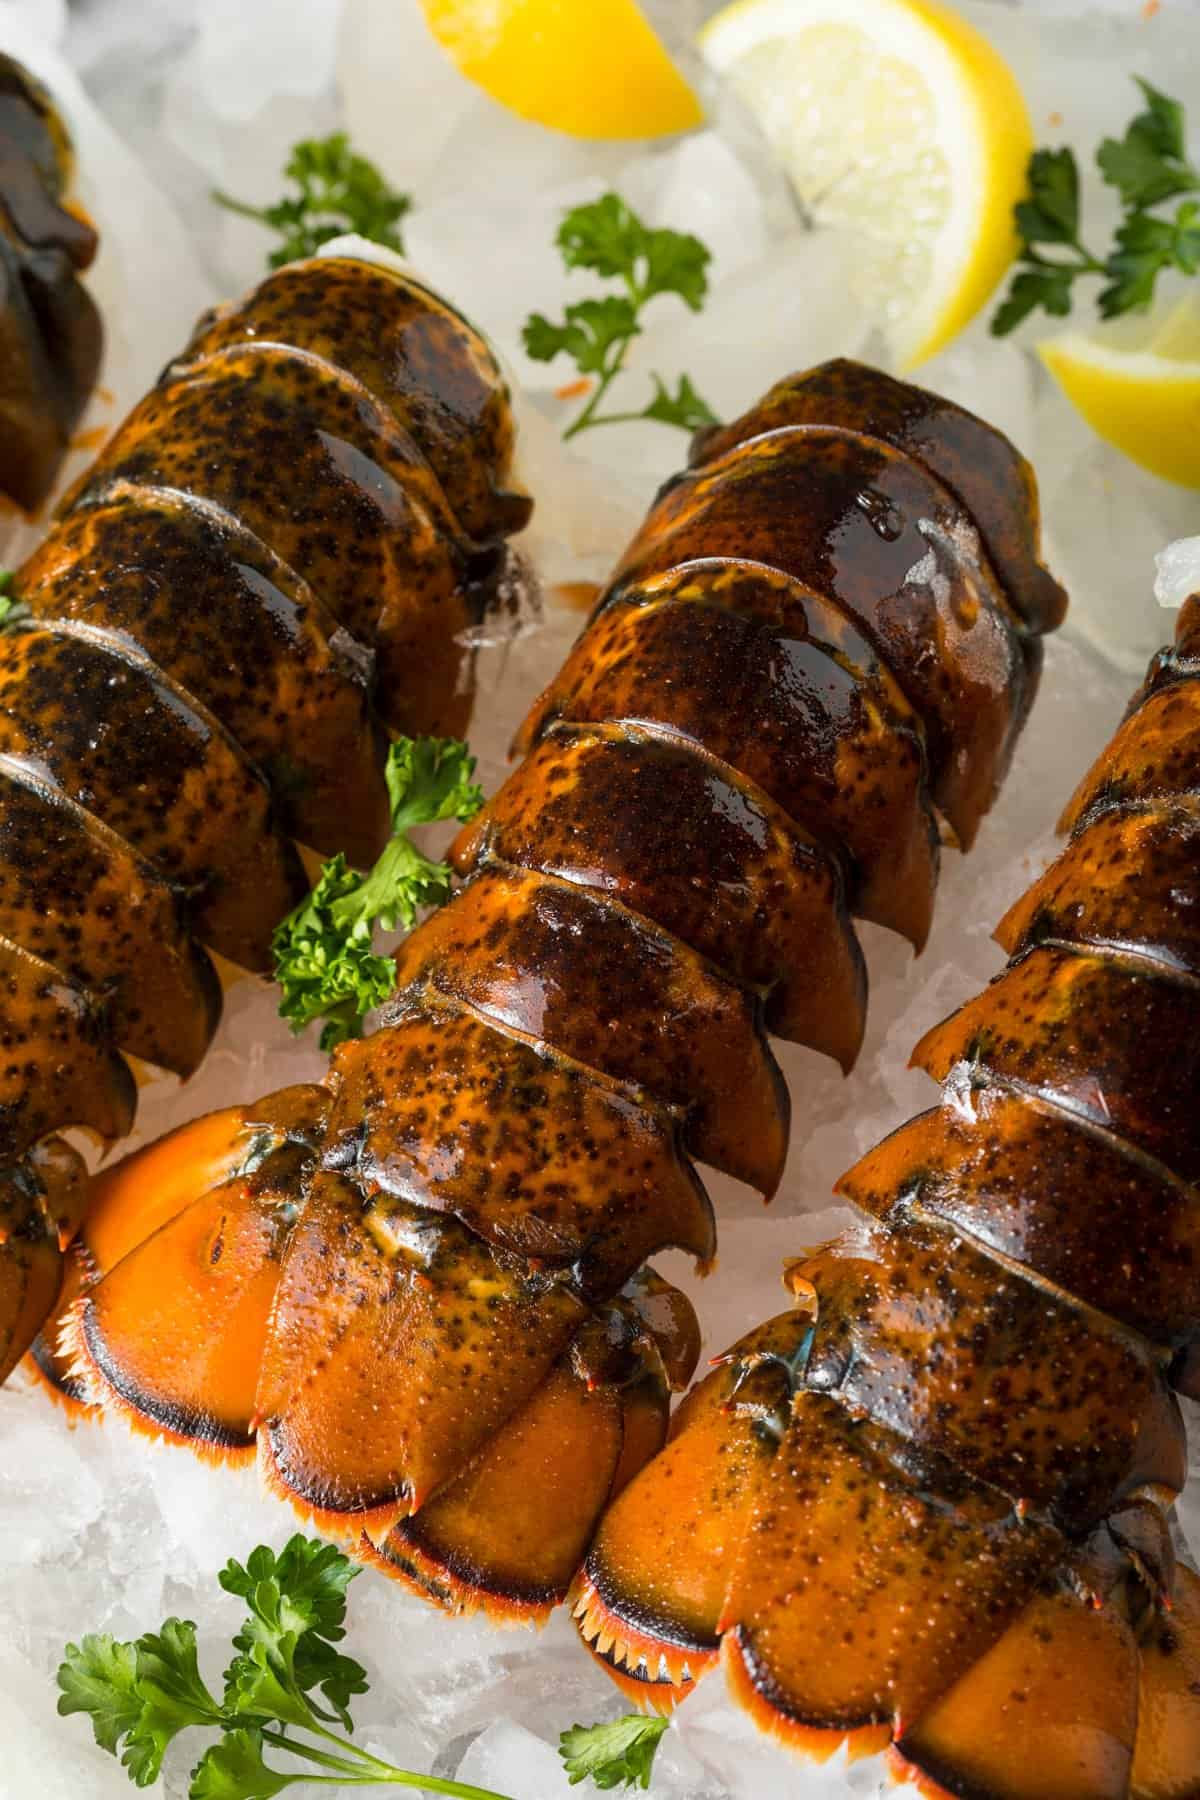 Fresh lobster tails on ice garnished with parsley